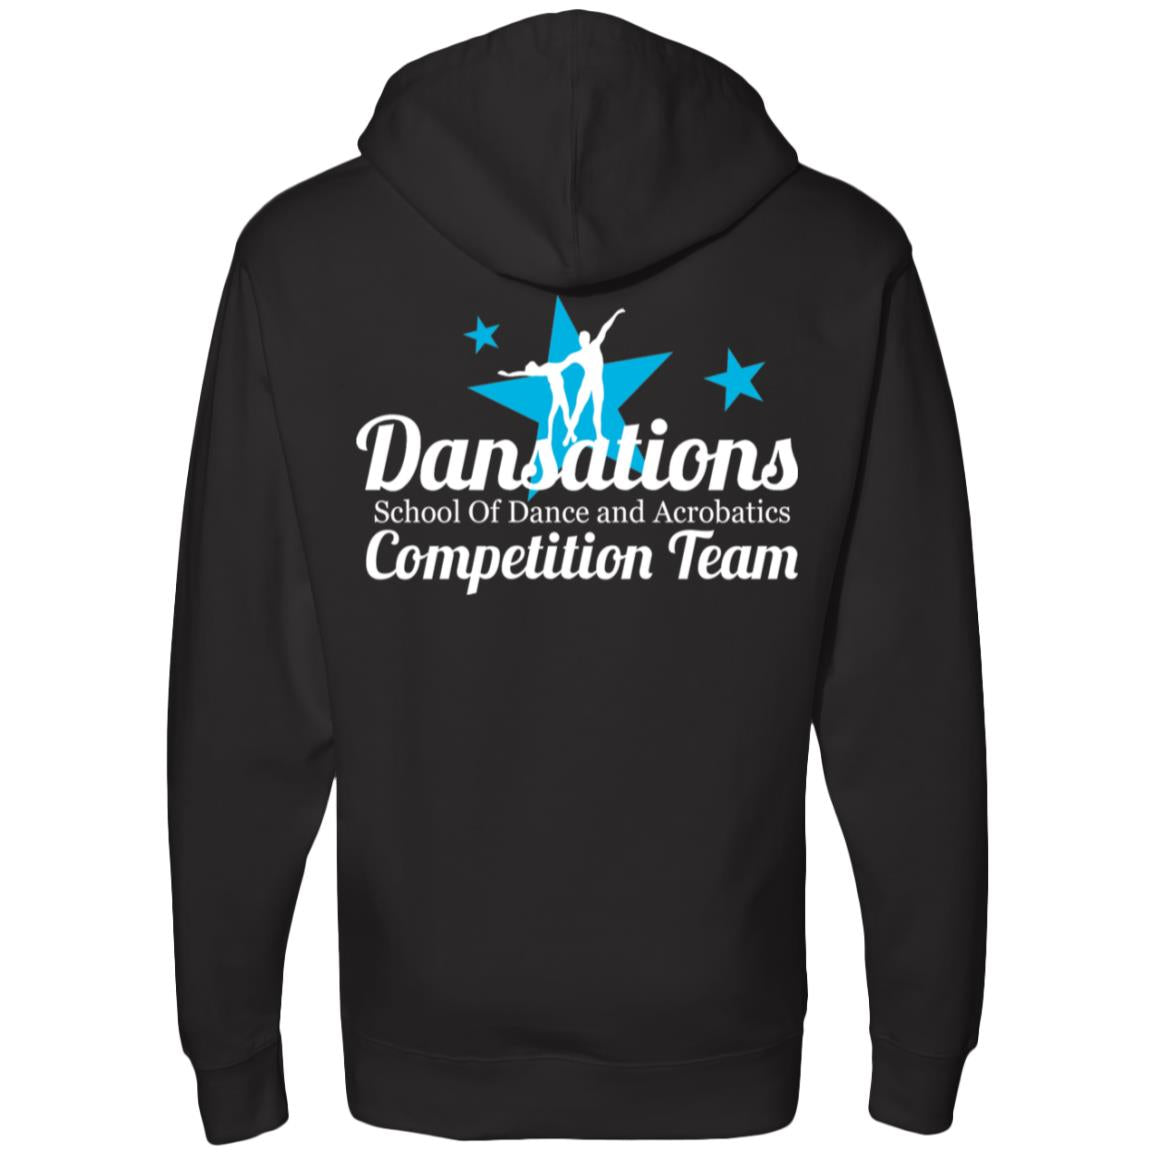 Dansations Competition Team Midweight Hooded Sweatshirt